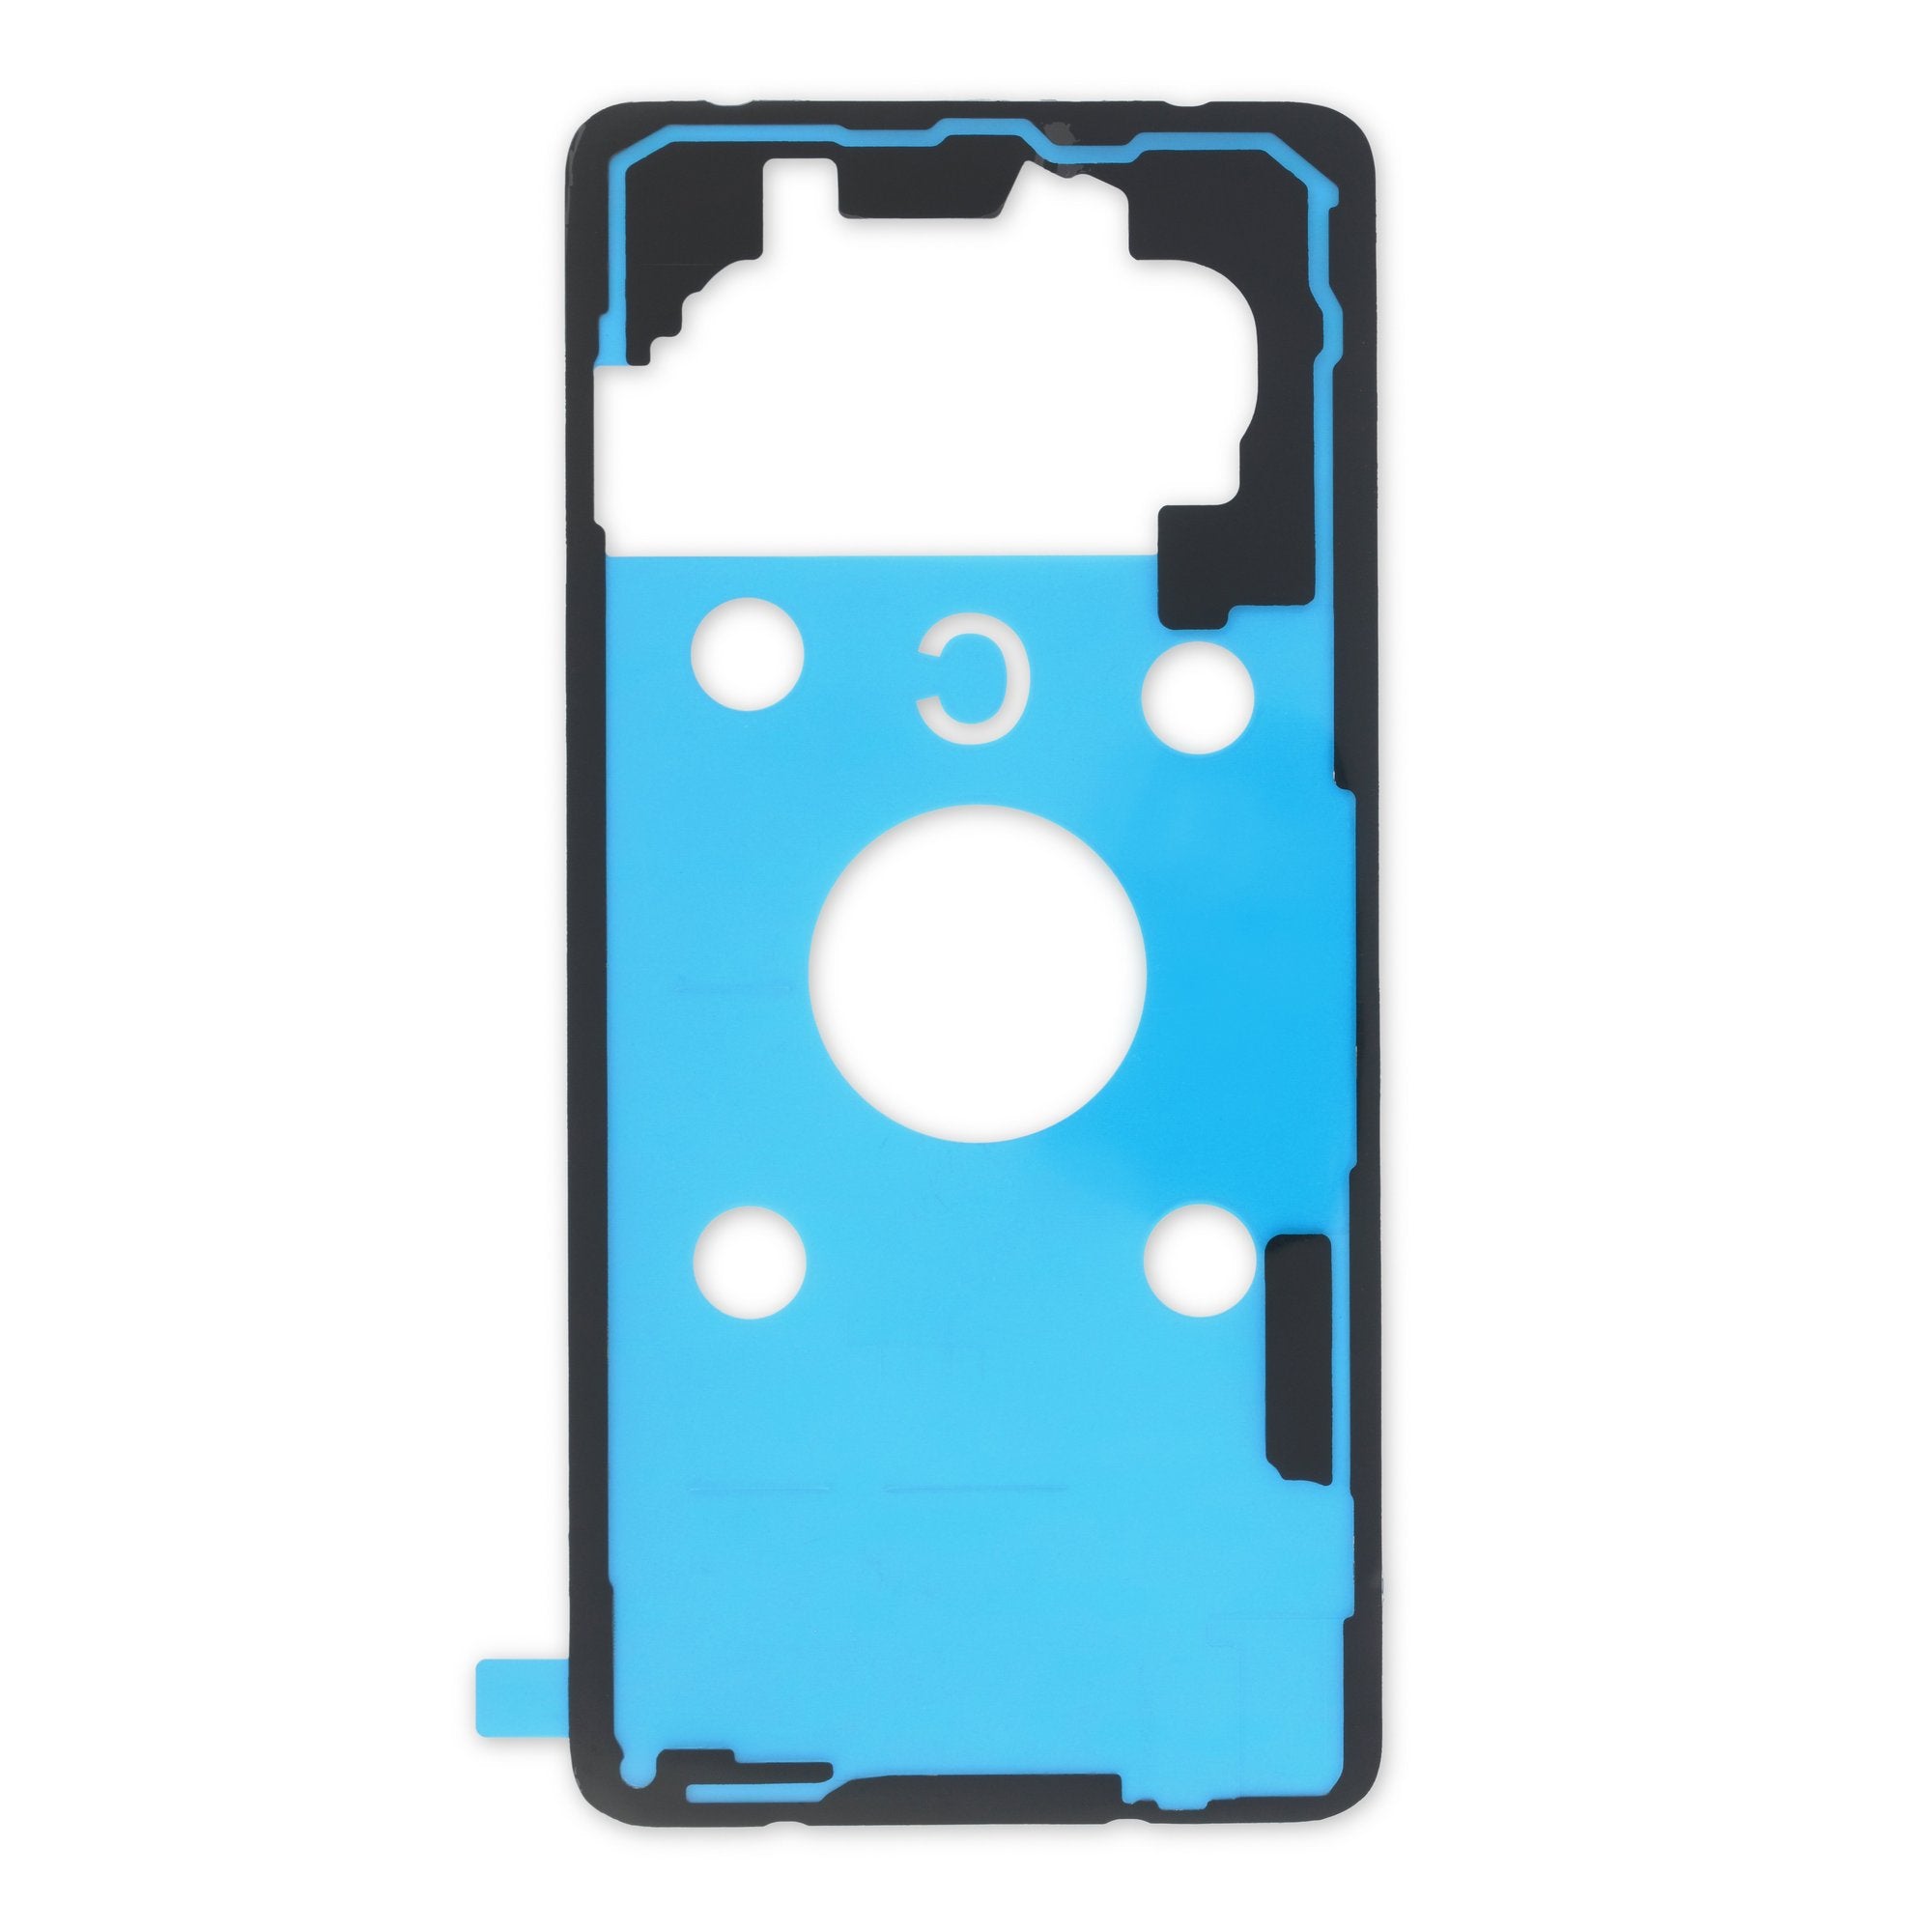 Galaxy S10+ Rear Cover Adhesive New